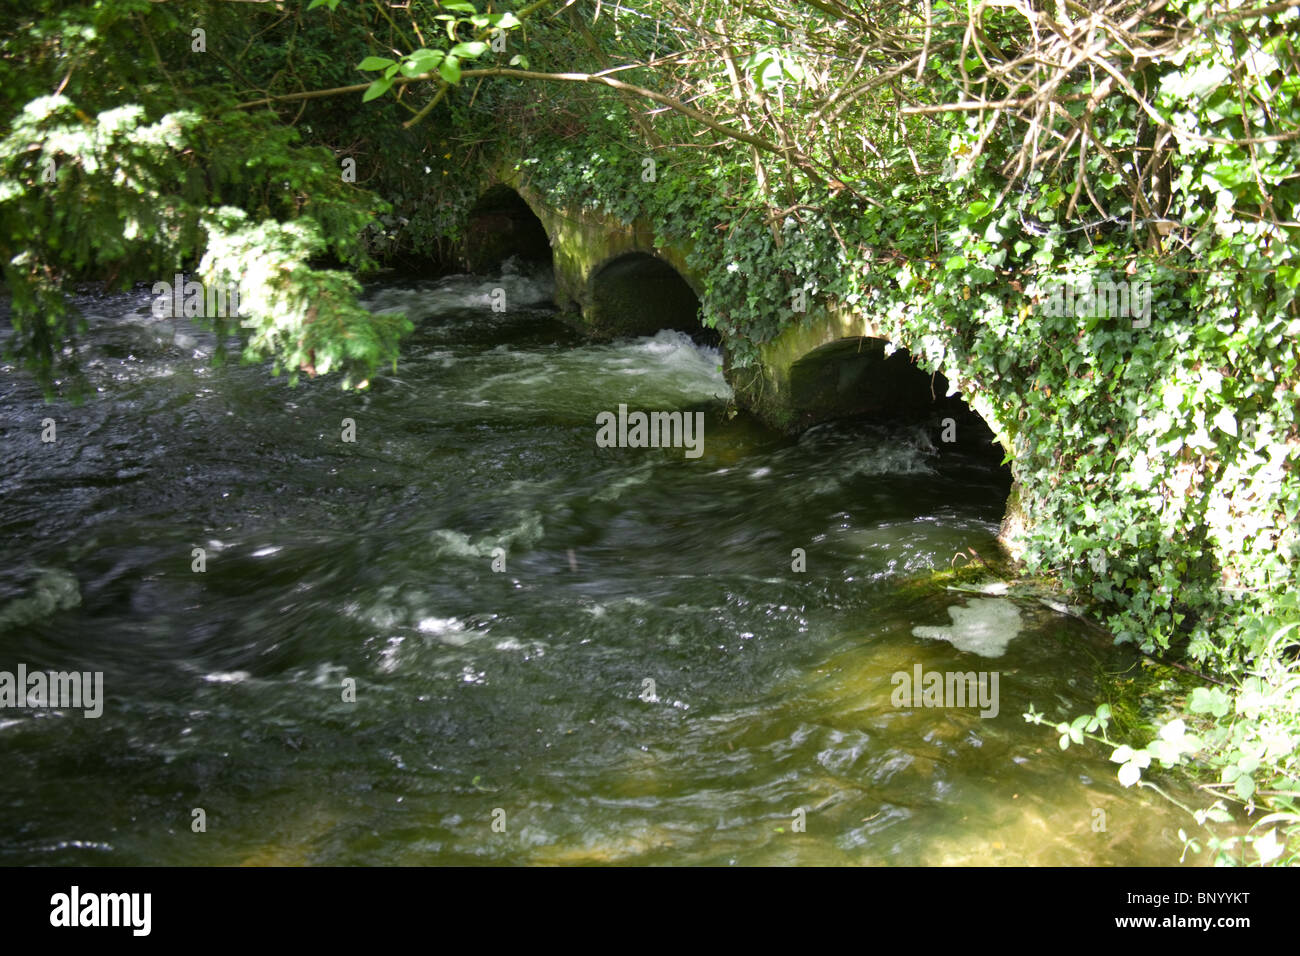 River Alre, Alresford, Hampshire, Angleterre, Royaume-Uni. Banque D'Images